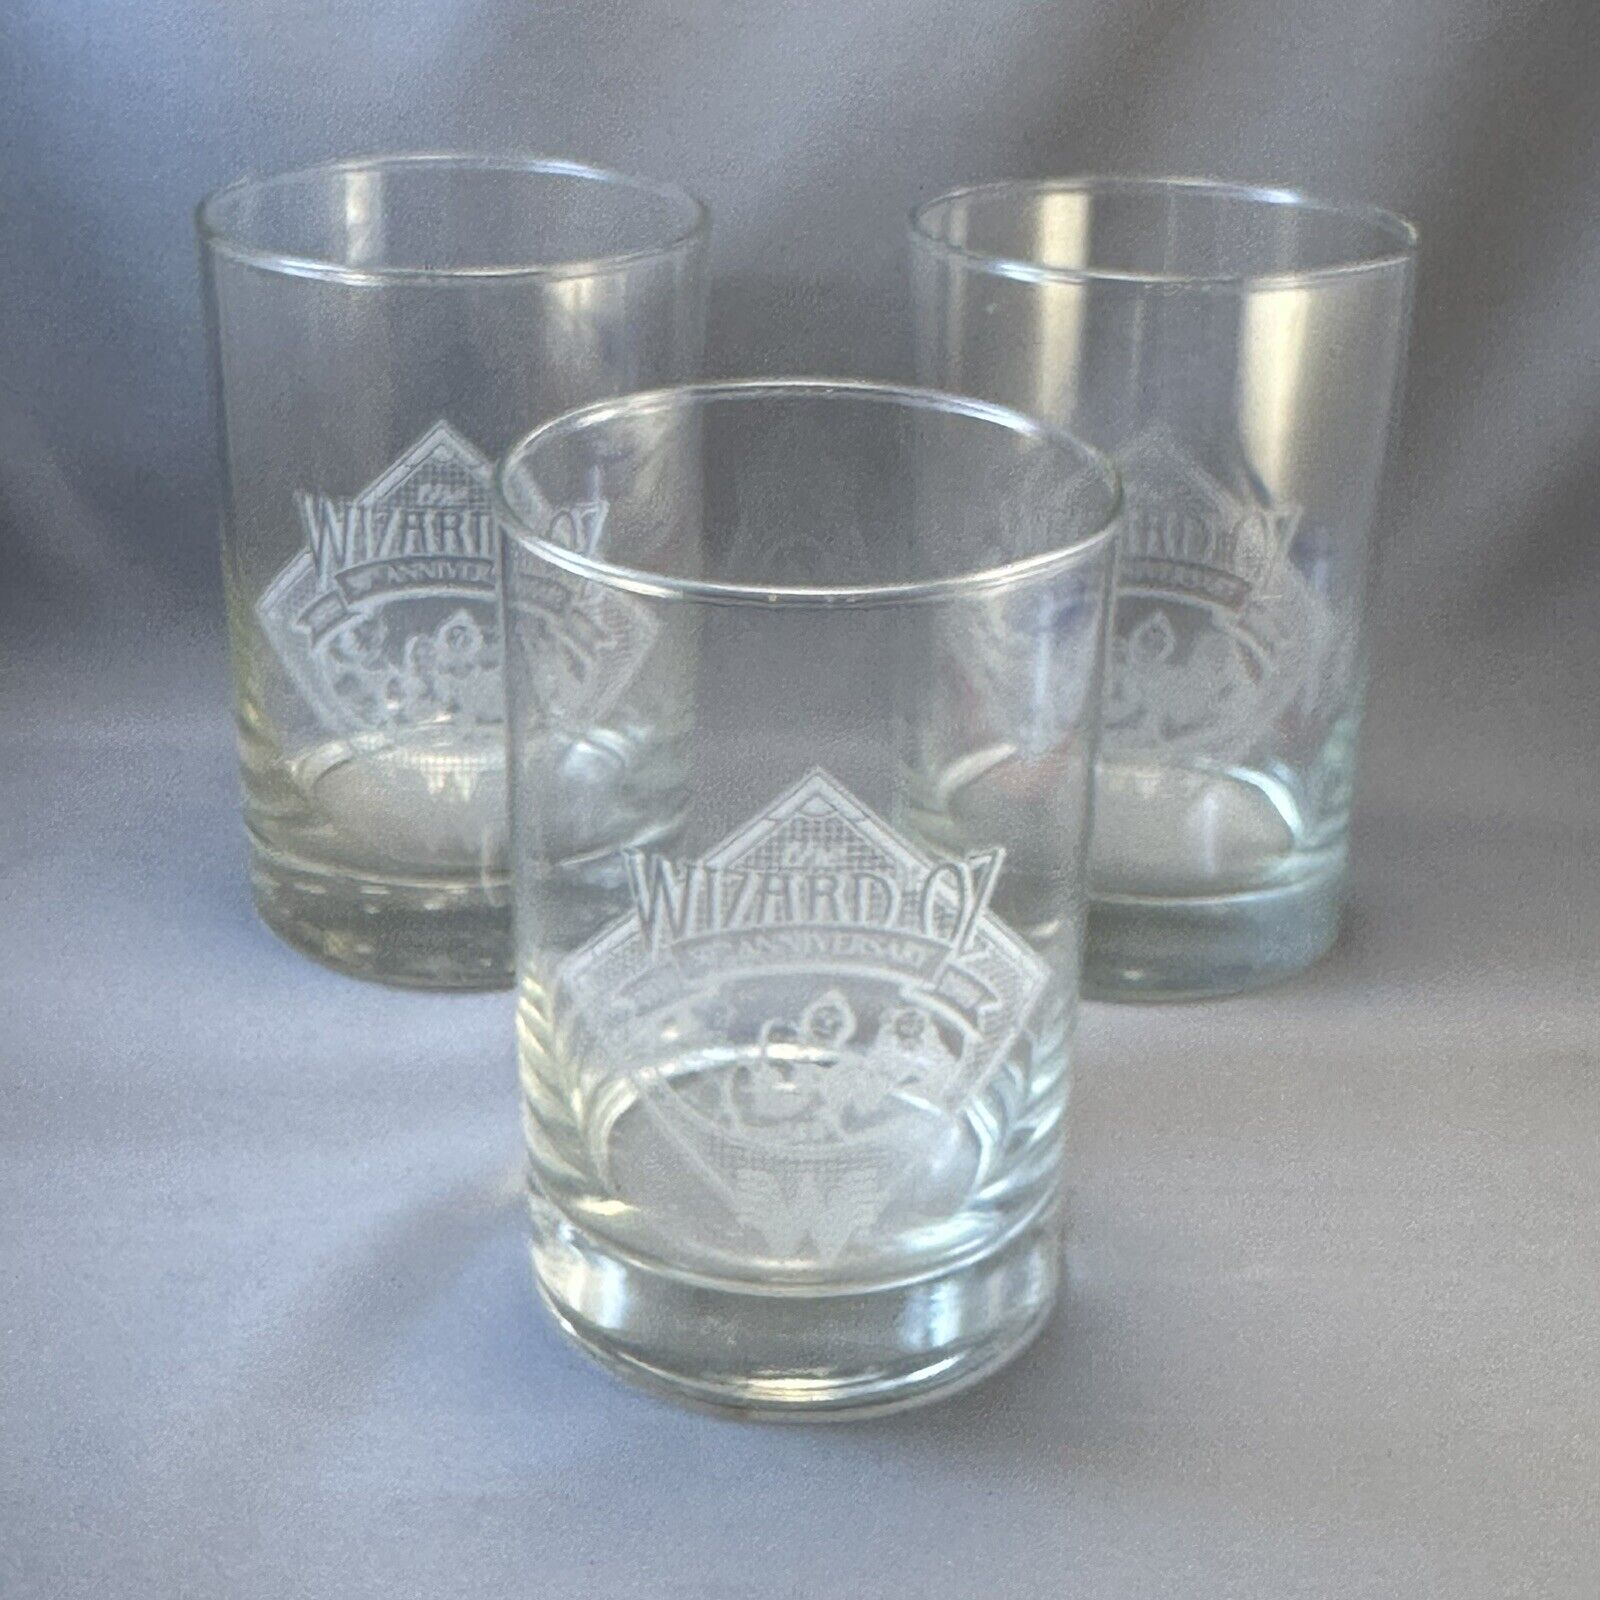 Set Of 3 Wizard of Oz 50th Anniversary Glasses Whataburger 1989 Collector